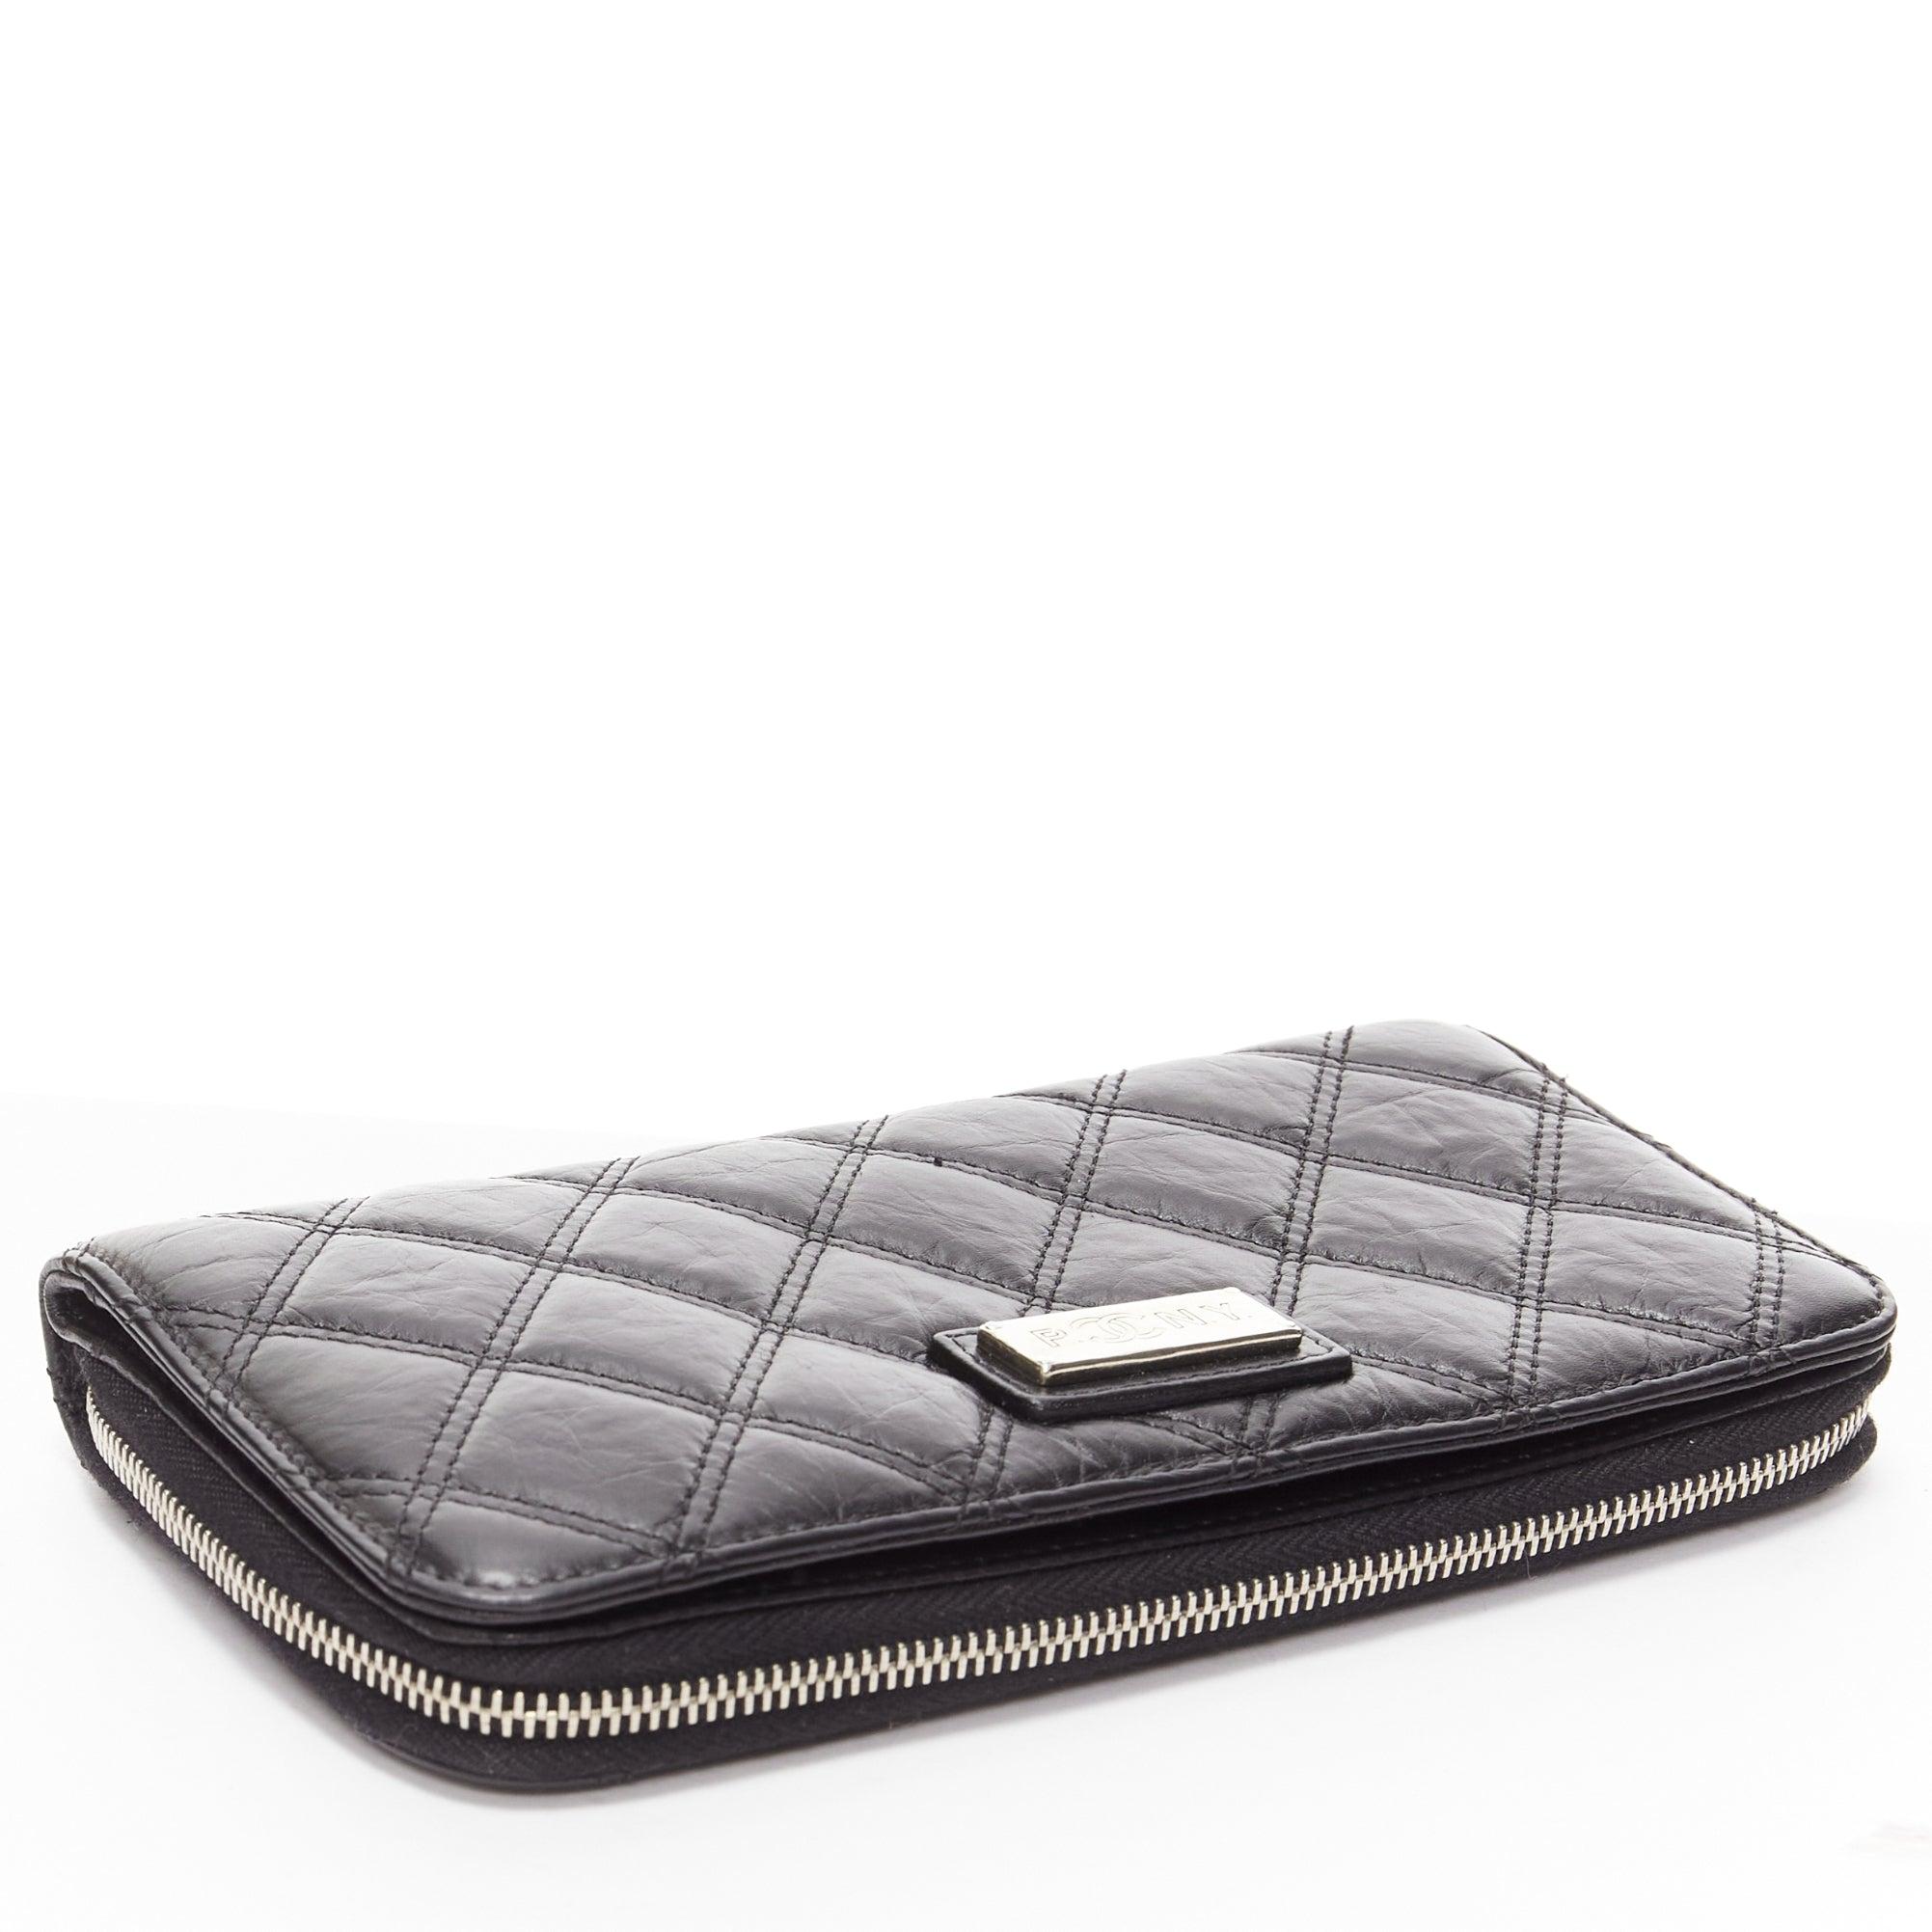 CHANEL Paris New York black quilted leather silver logo long zip wallet For Sale 1